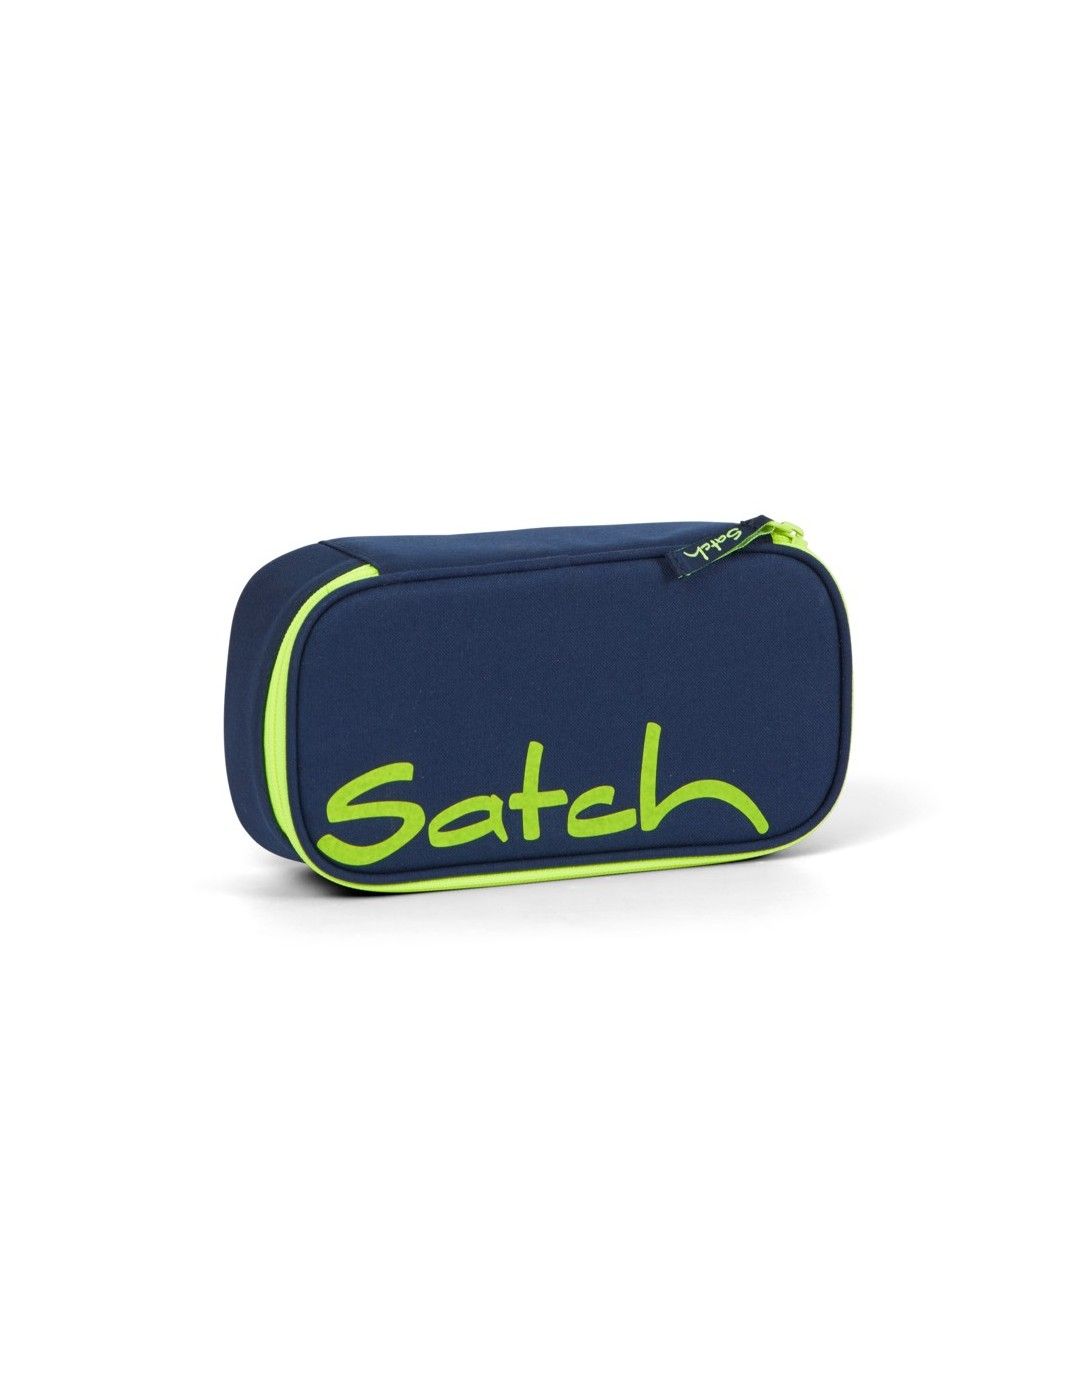 Satch Schlamperbox Toxic Yellow